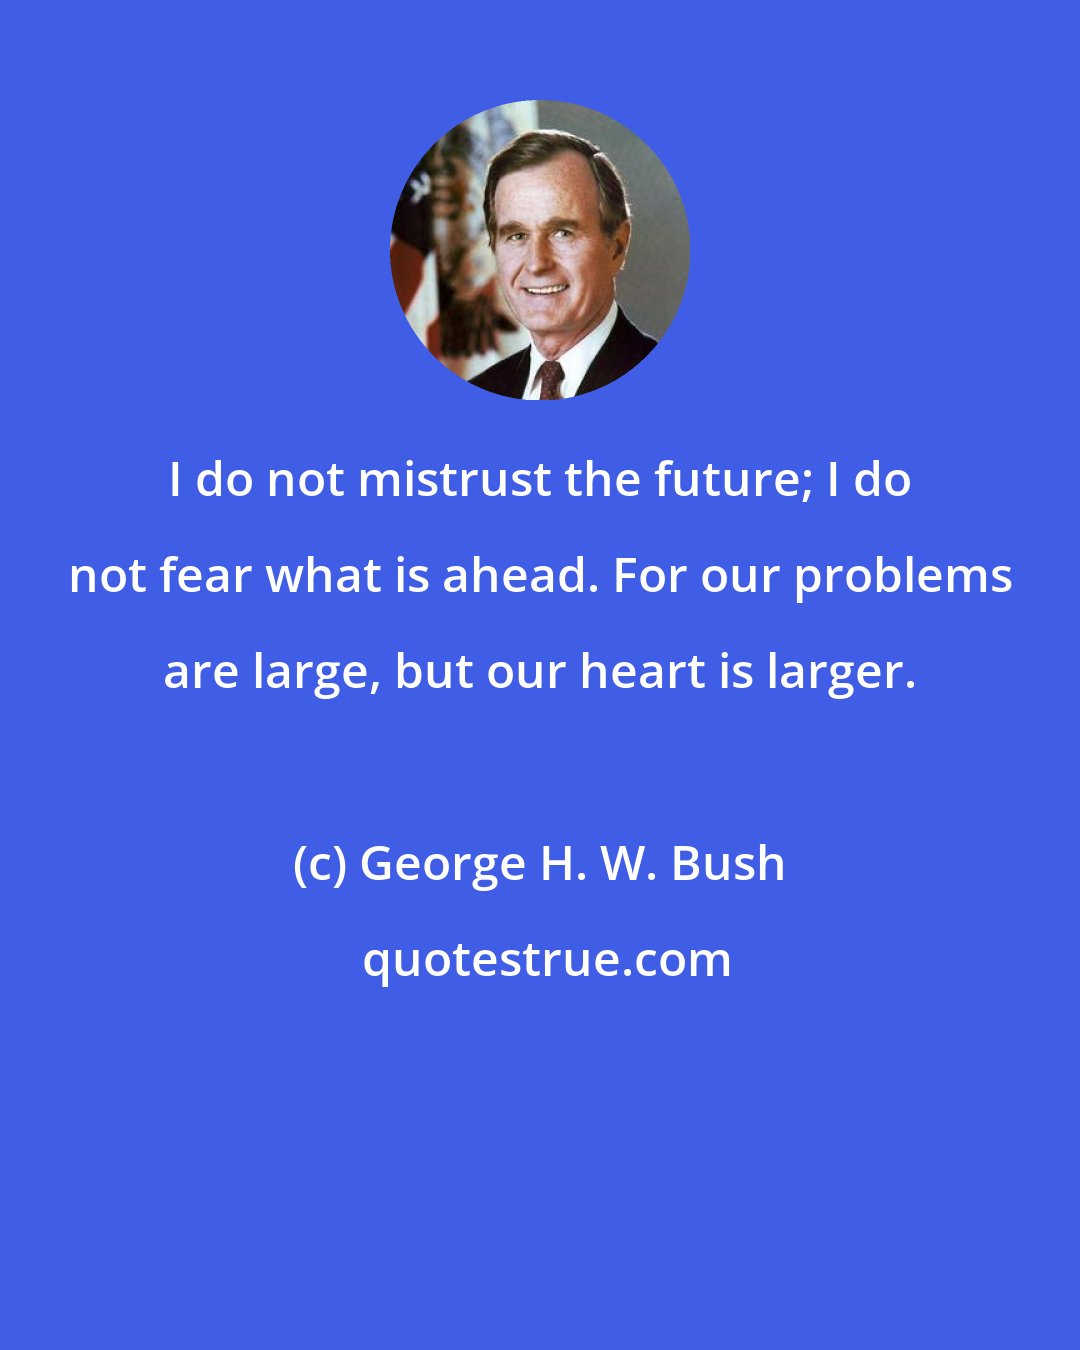 George H. W. Bush: I do not mistrust the future; I do not fear what is ahead. For our problems are large, but our heart is larger.